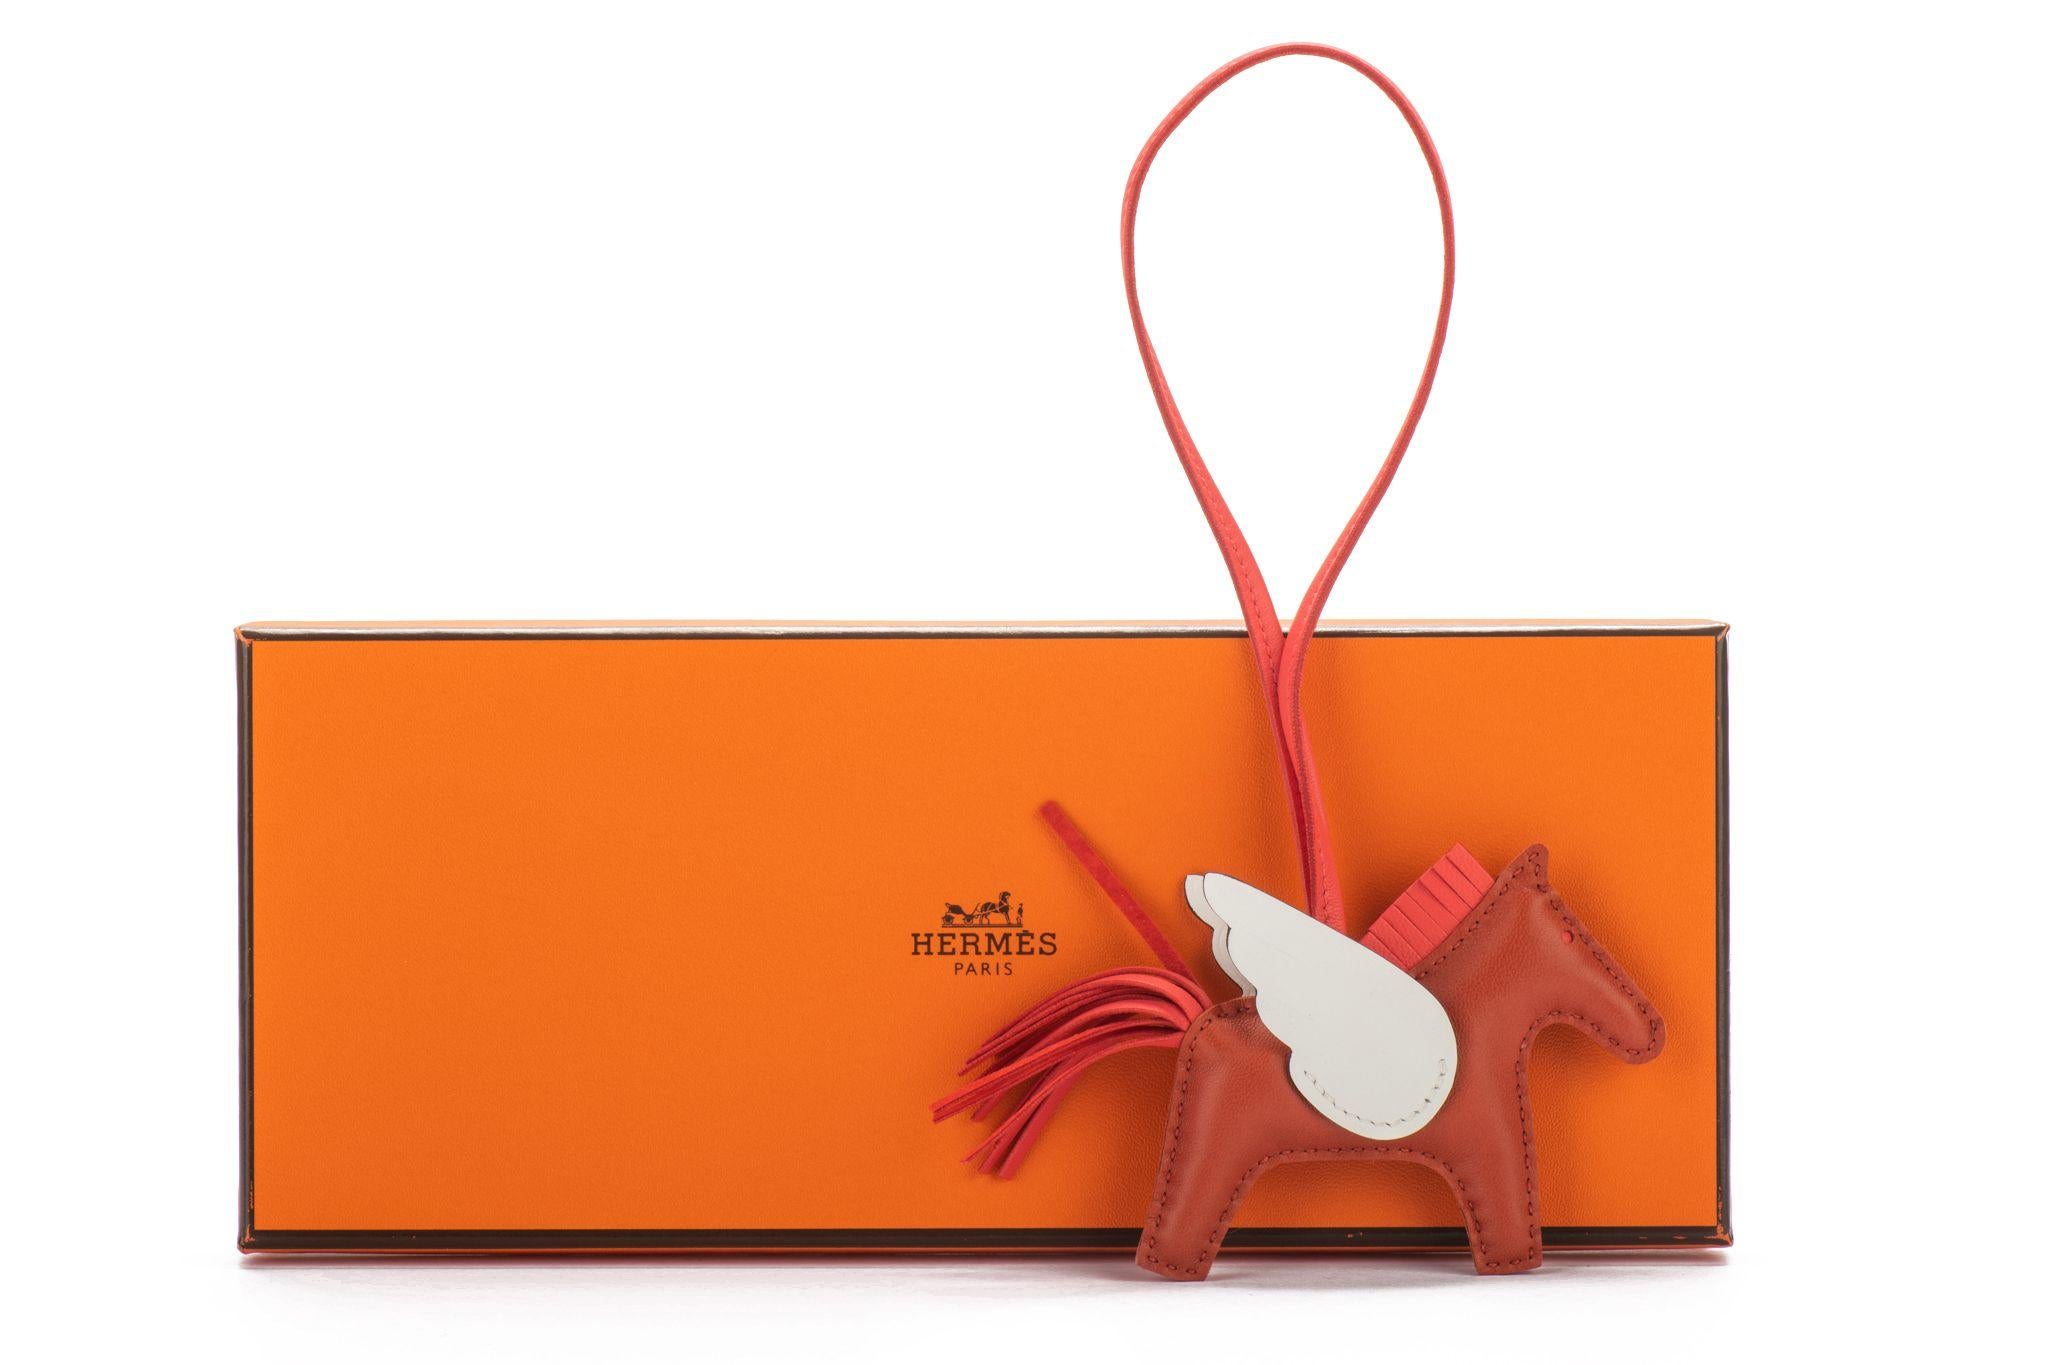 Hermes new grigri rodeo Pegase bag charm. Cui, nata and orange. Date stamp U for 2022. Comes with original box.